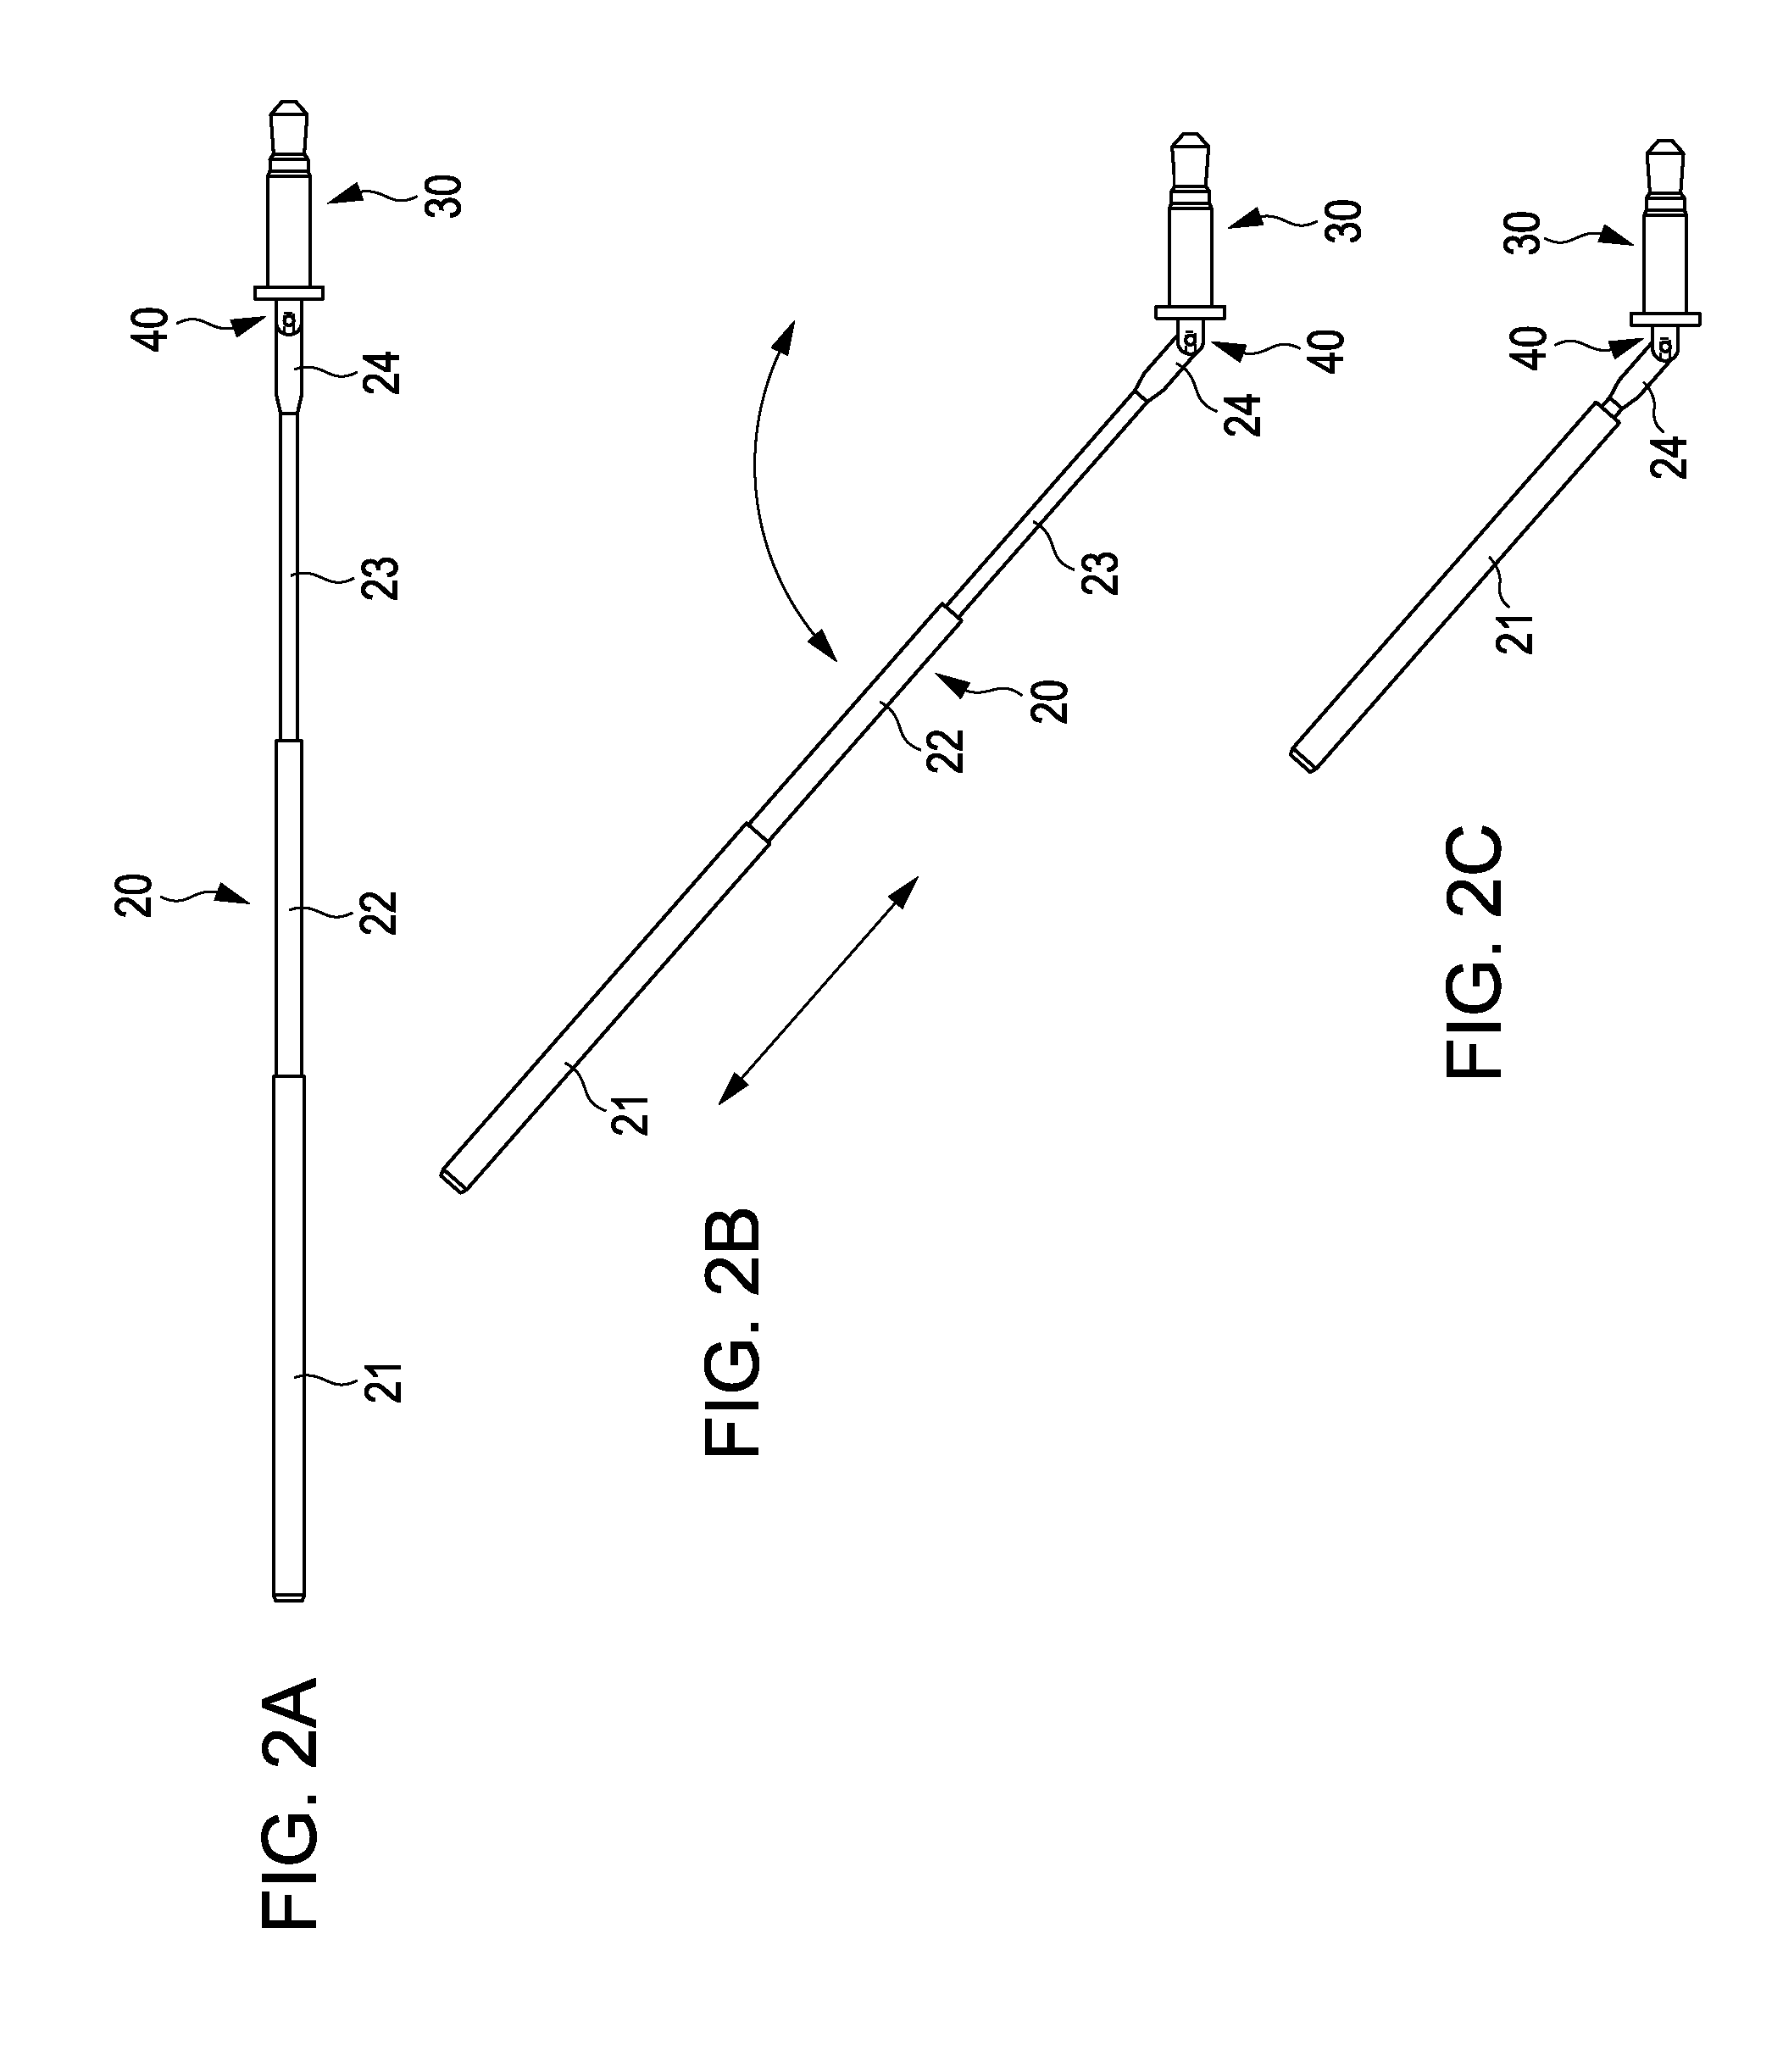 Antenna device, conversion adaptor, and receiver